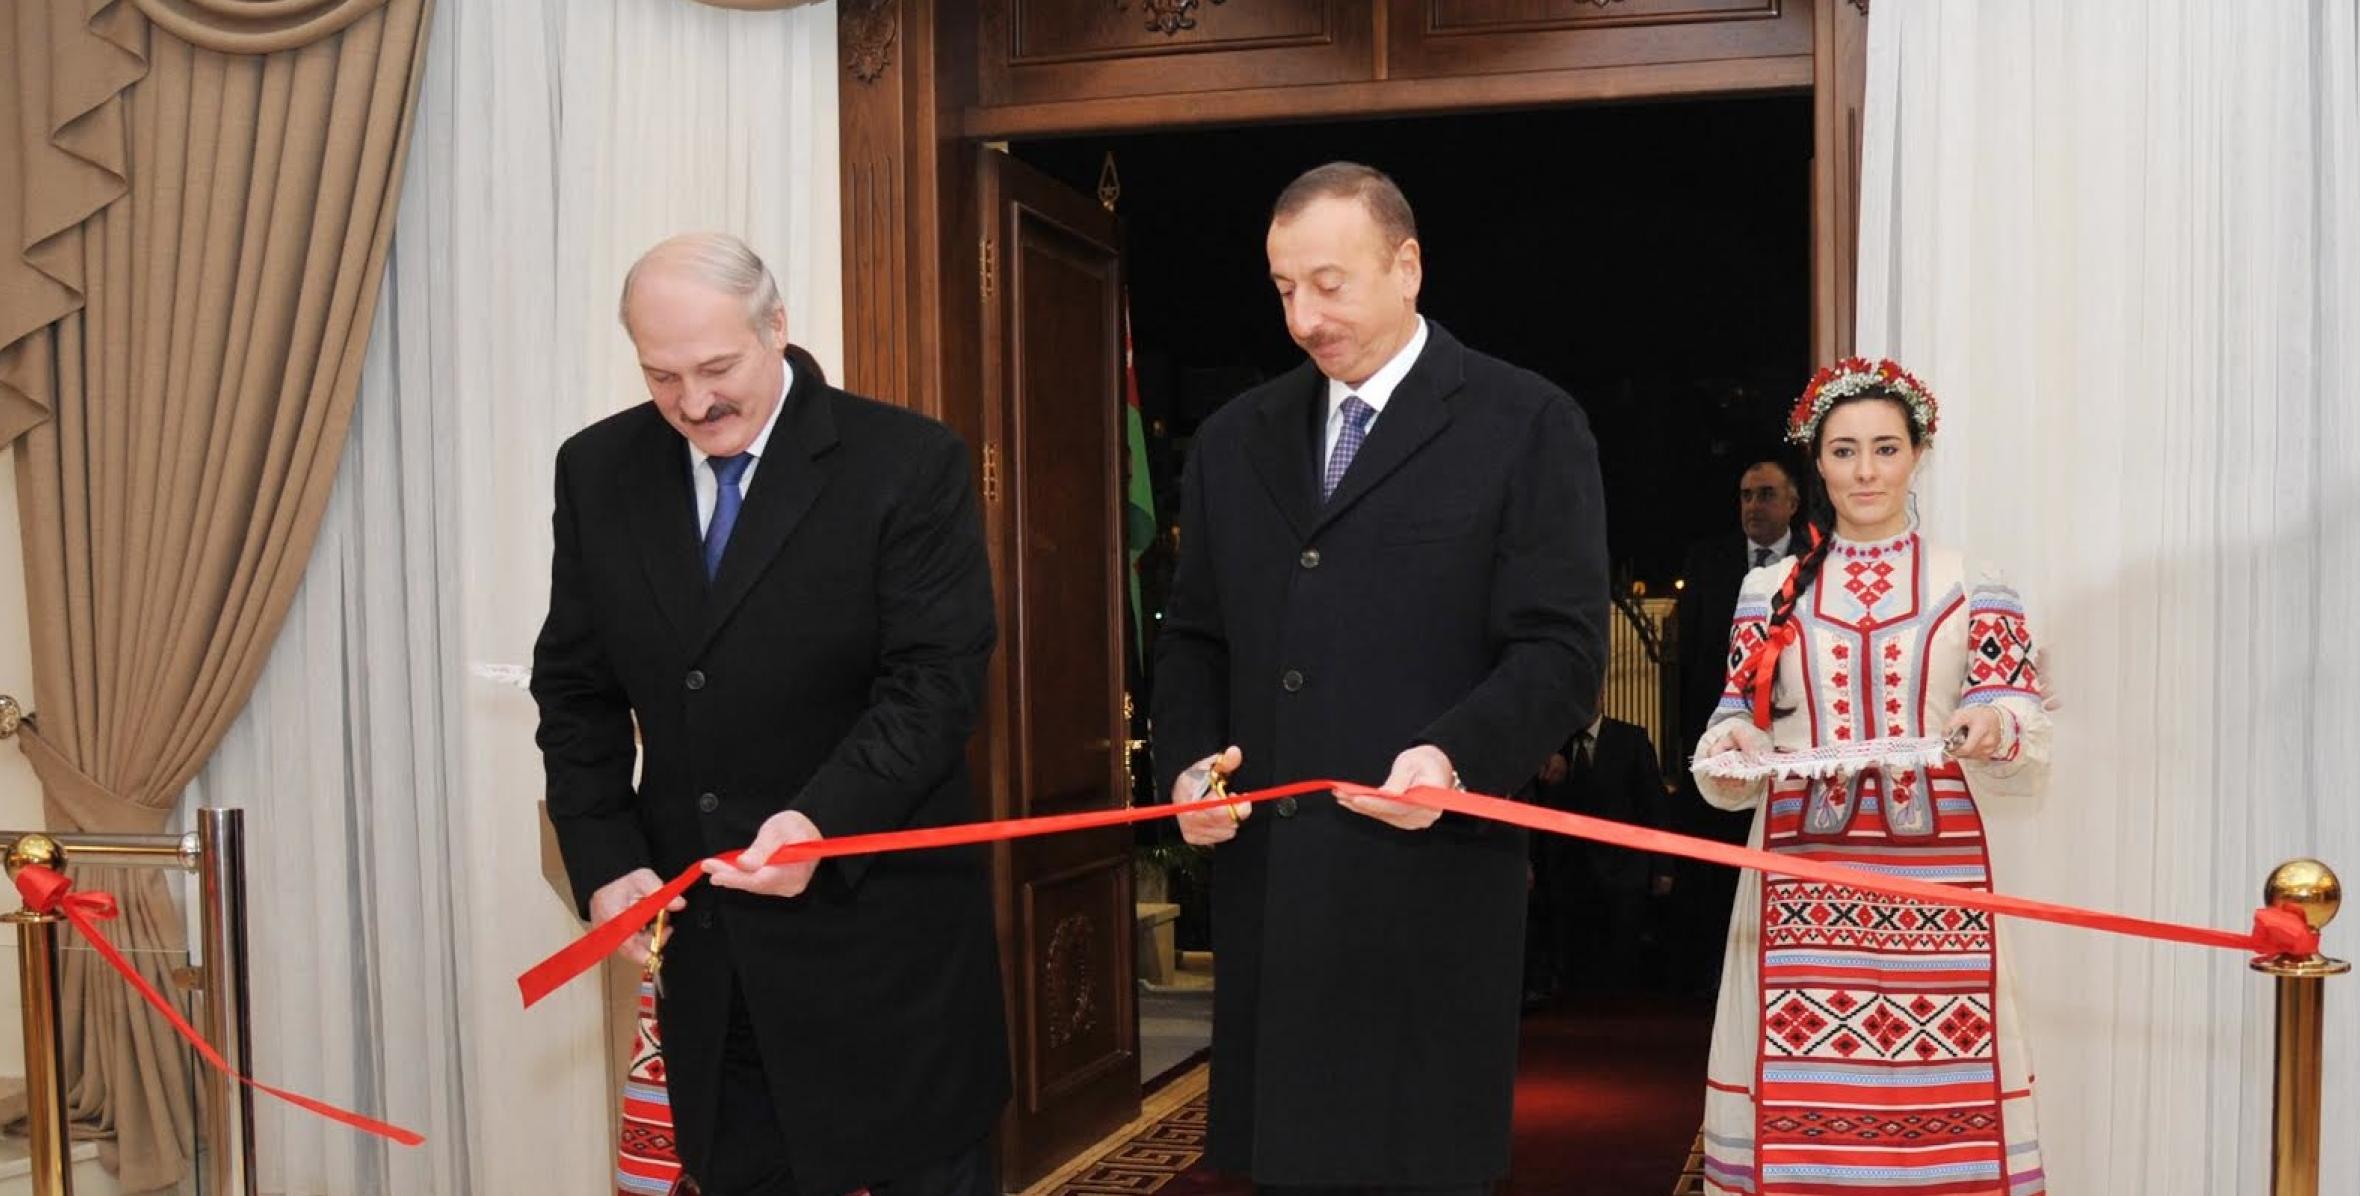 Ilham Aliyev and Belarusian President Aleksandr Lukashenko took part in the opening of the new building of the Embassy of the Republic of Belarus in Azerbaijan